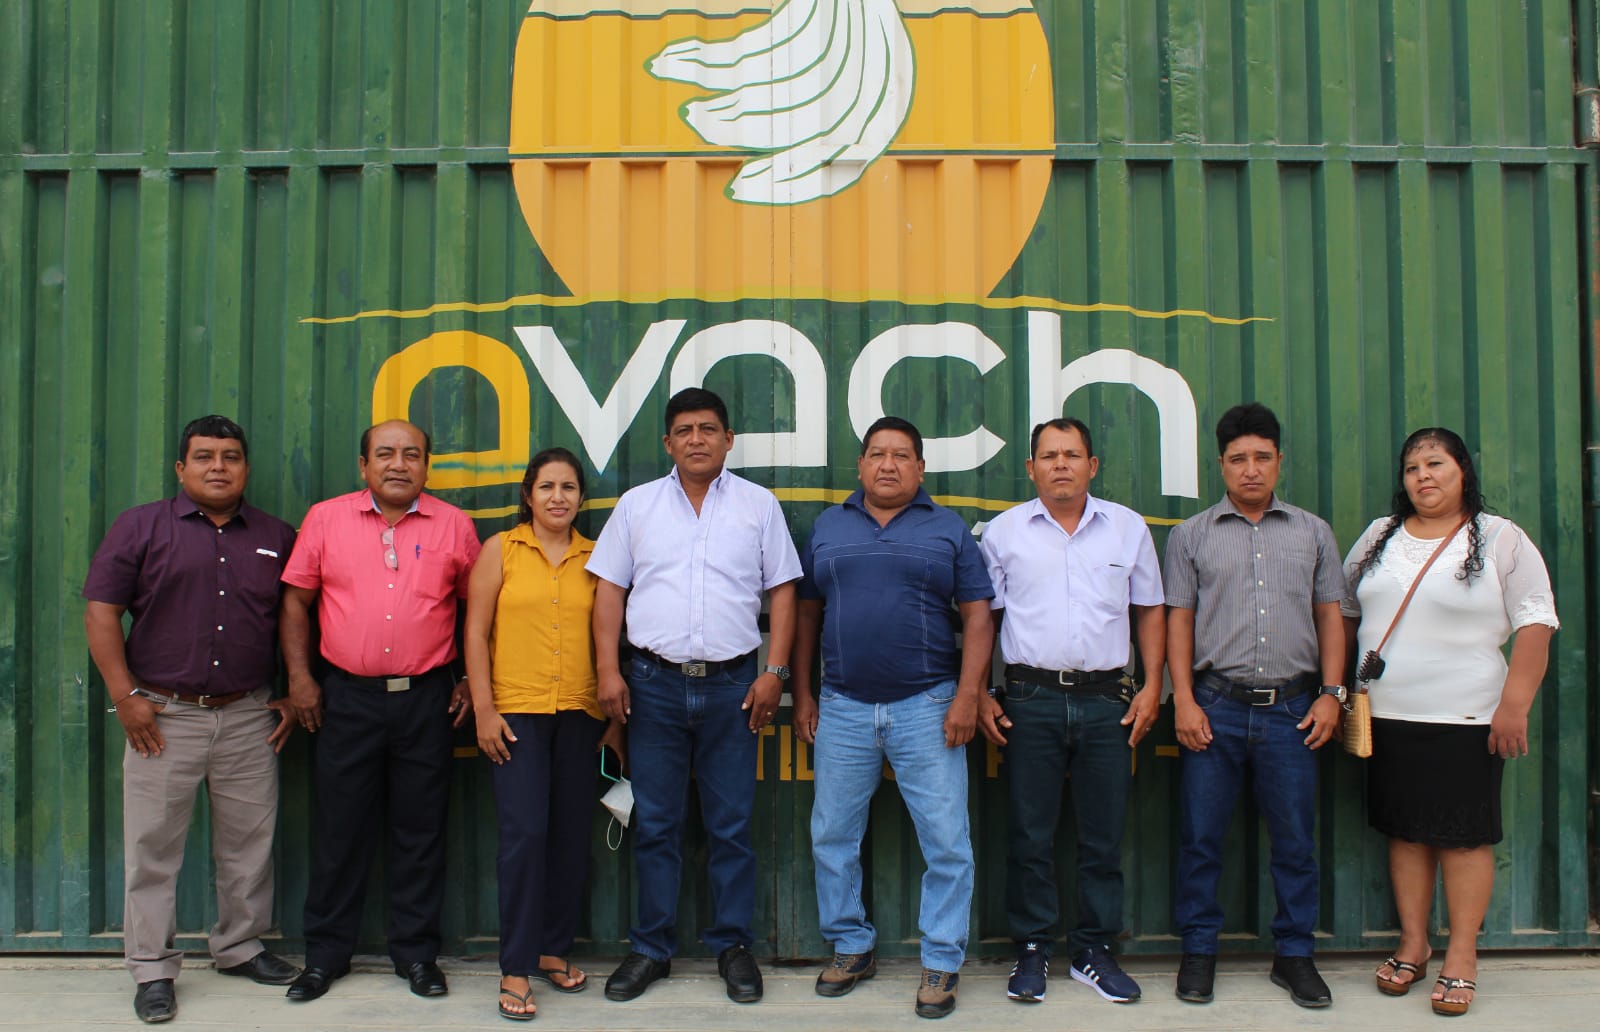 Eight directors standing in front of the AVACH warehouse